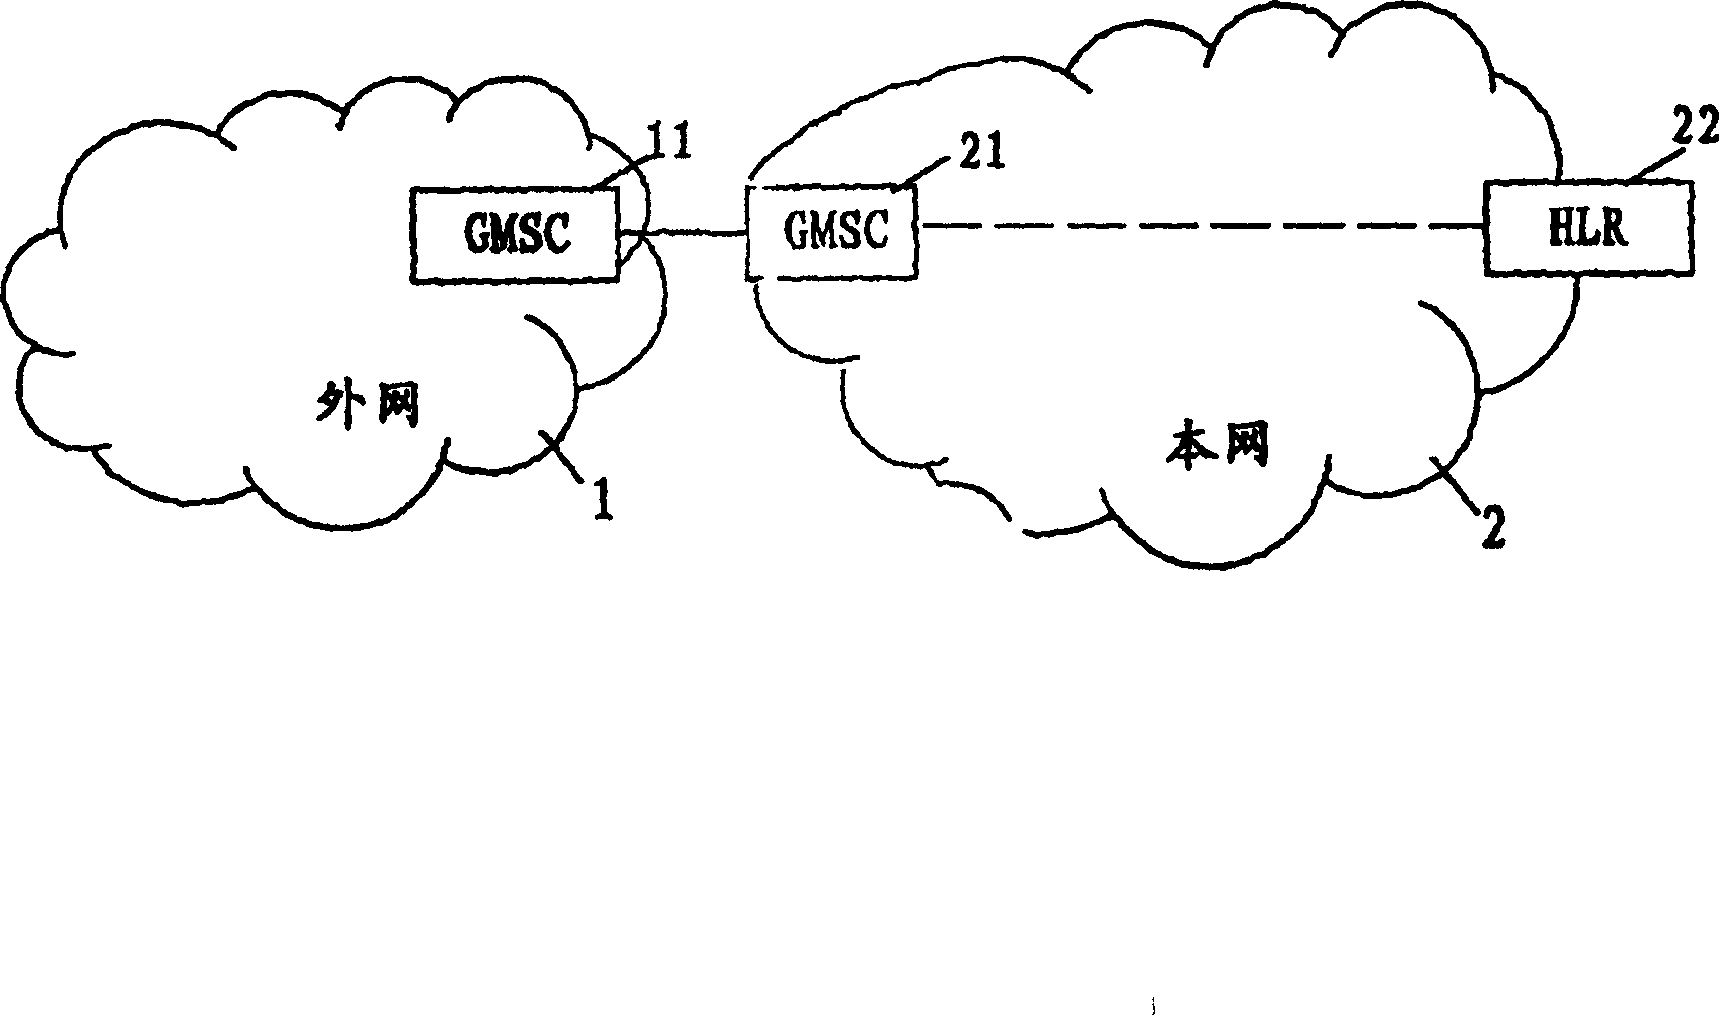 Method for implementing intelligent service at roaming access mode and gateway mobile exchange centre